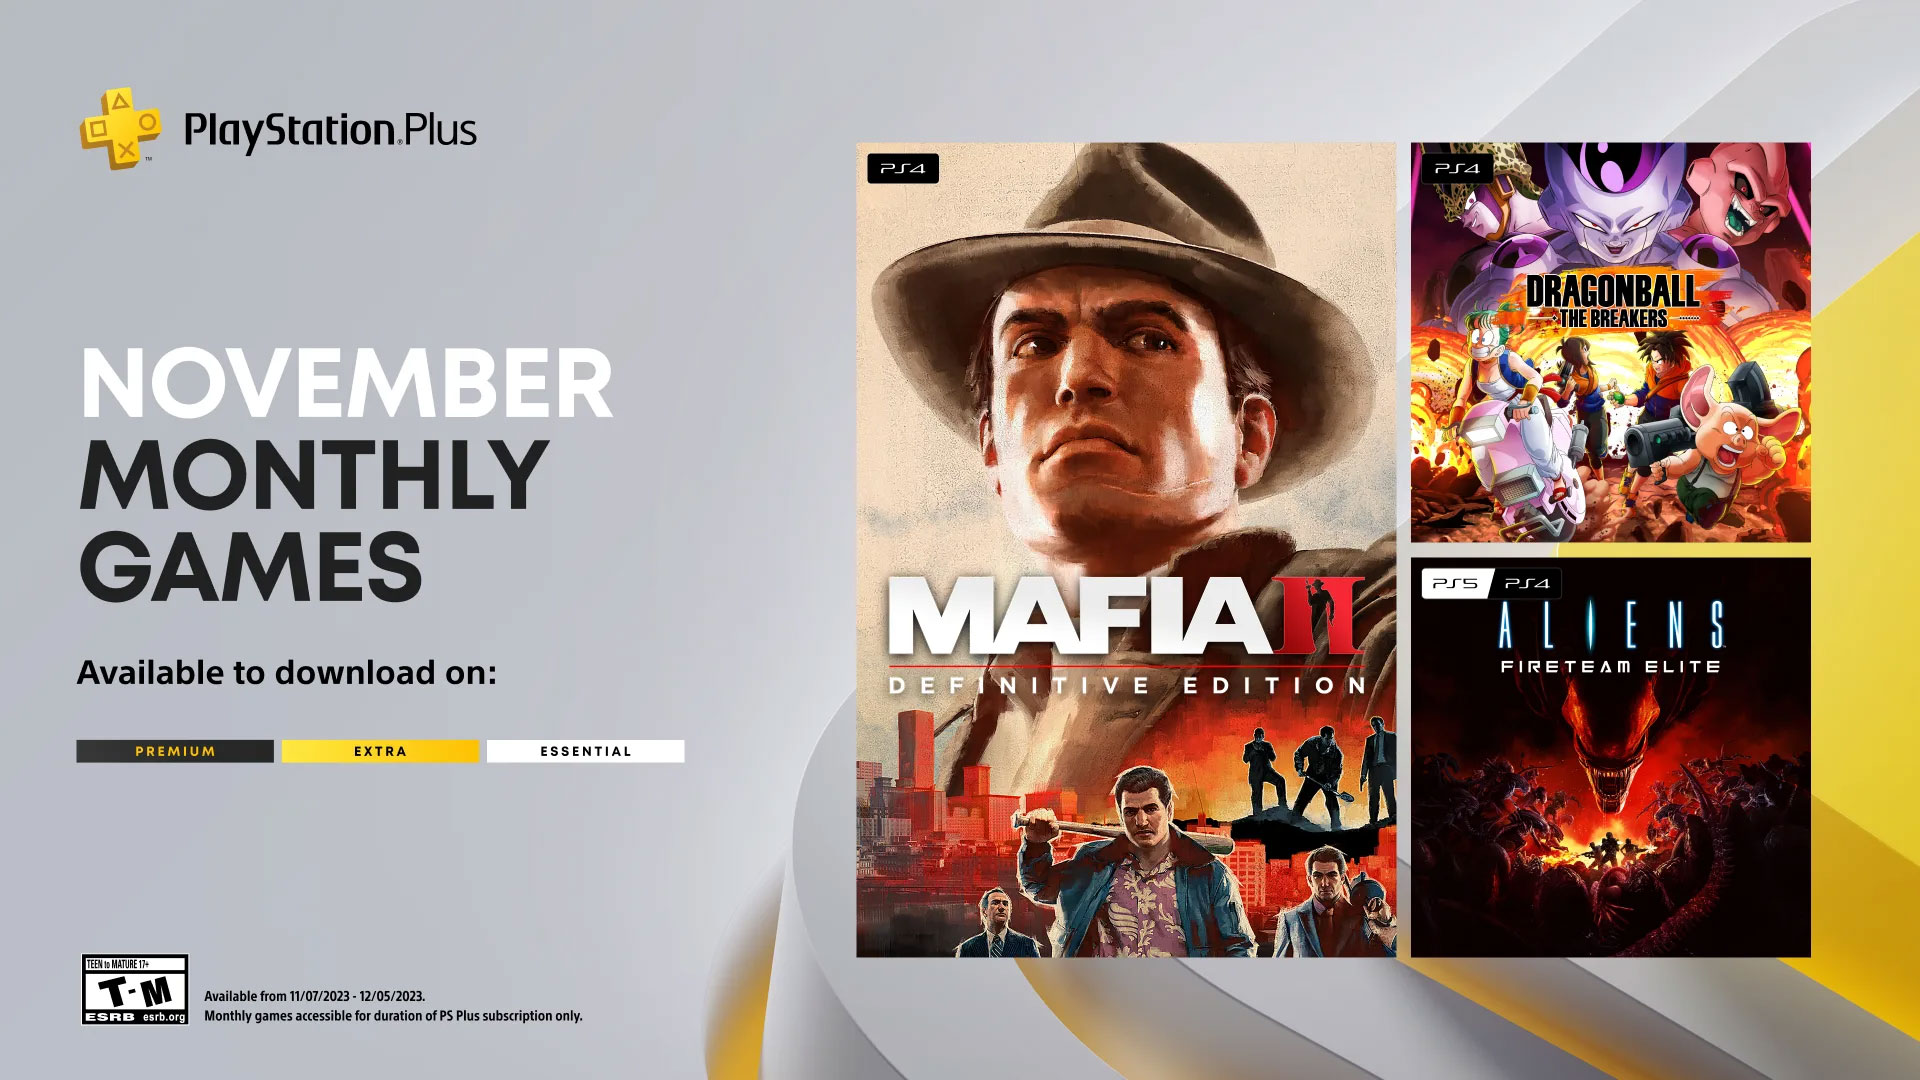 The PlayStation Plus Monthly Games for November will be available starting November 7